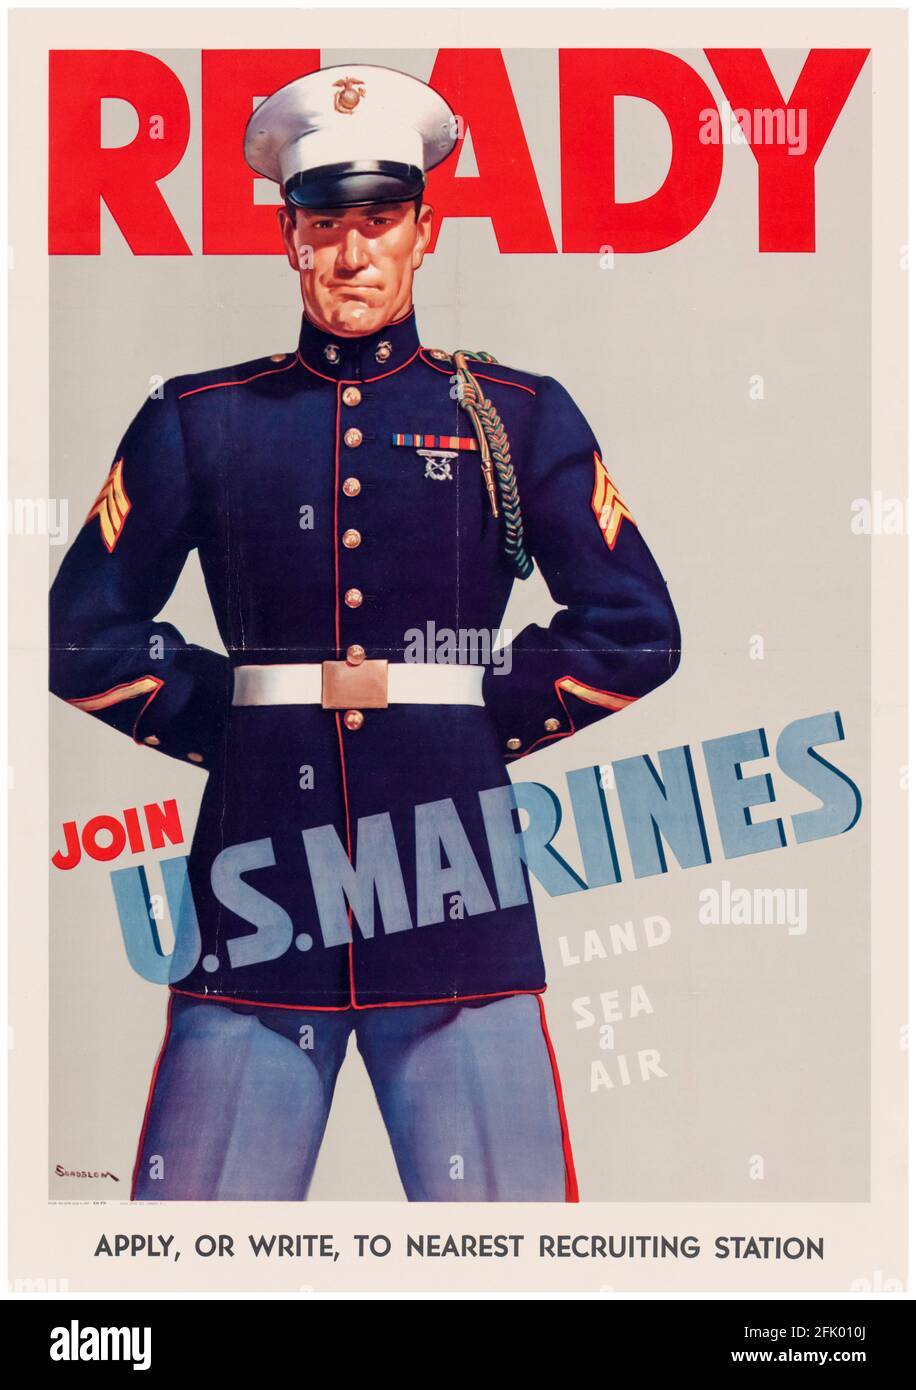 American, WW2 military recruitment poster, Ready, Join US Marines, (USMC), 1942-1945 Stock Photo